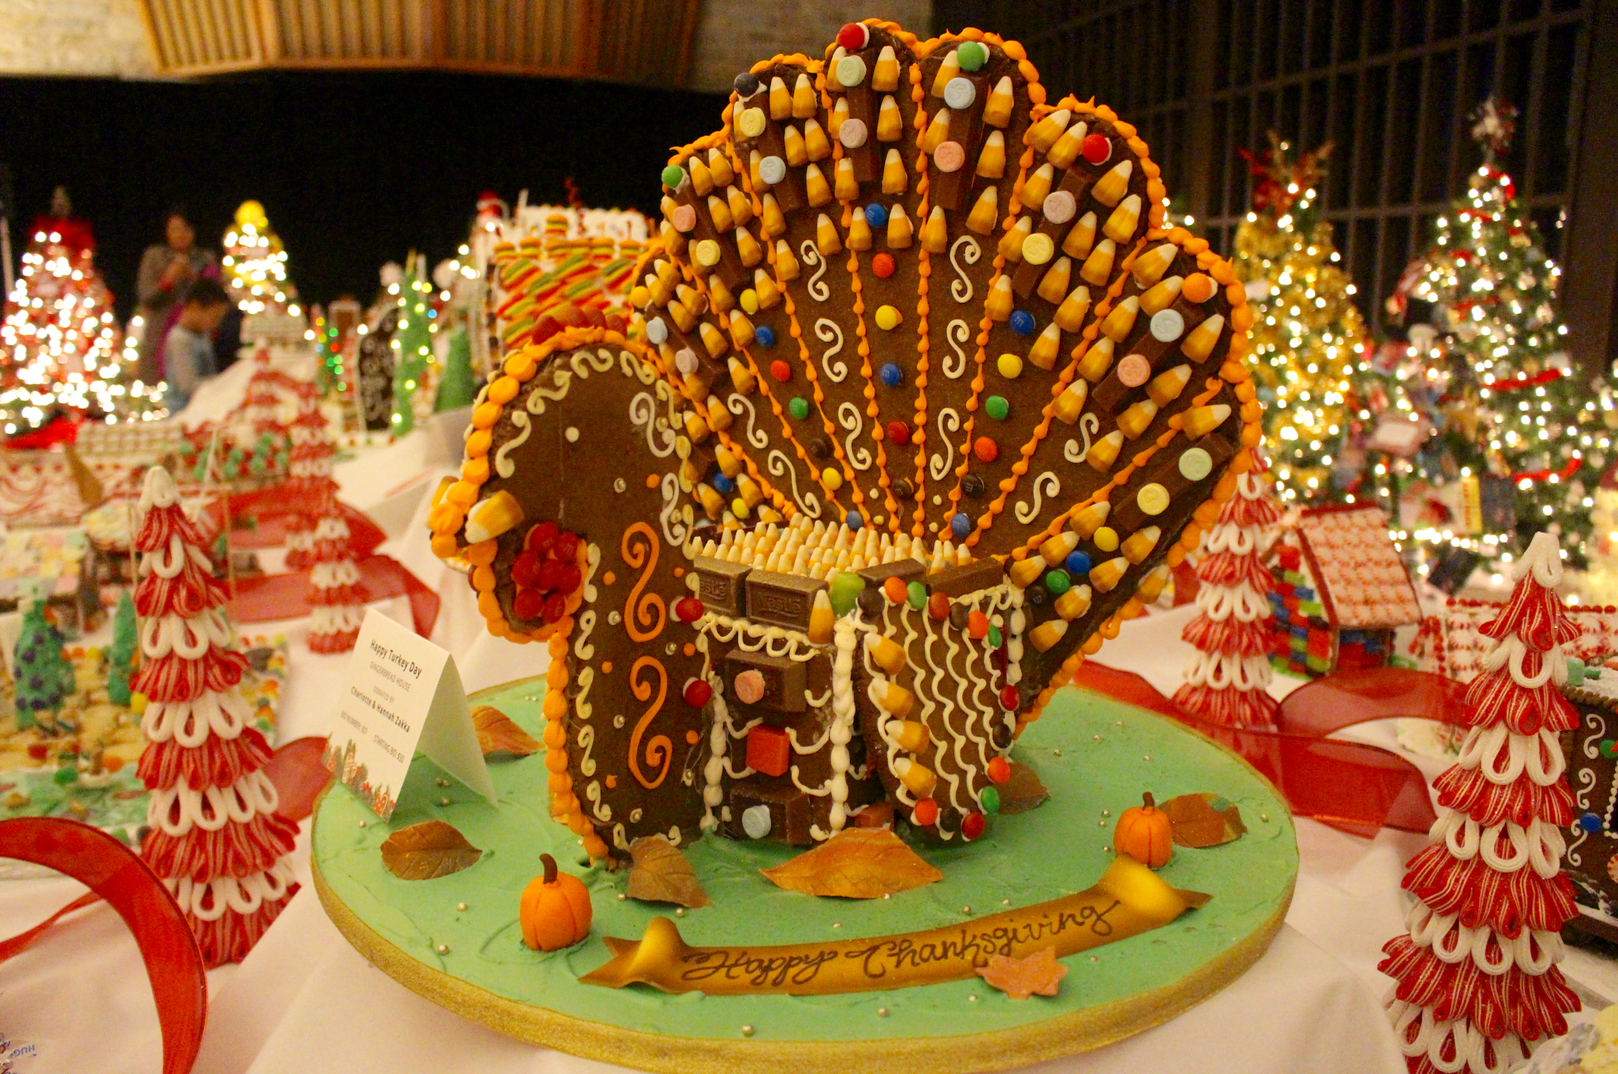 The Junior League of Greenwich's Enchanted Forest at Christ Church features one of a kind gingerbread houses and decorated Christmas trees. Nov 17, 2017 Photo: Leslie Yager